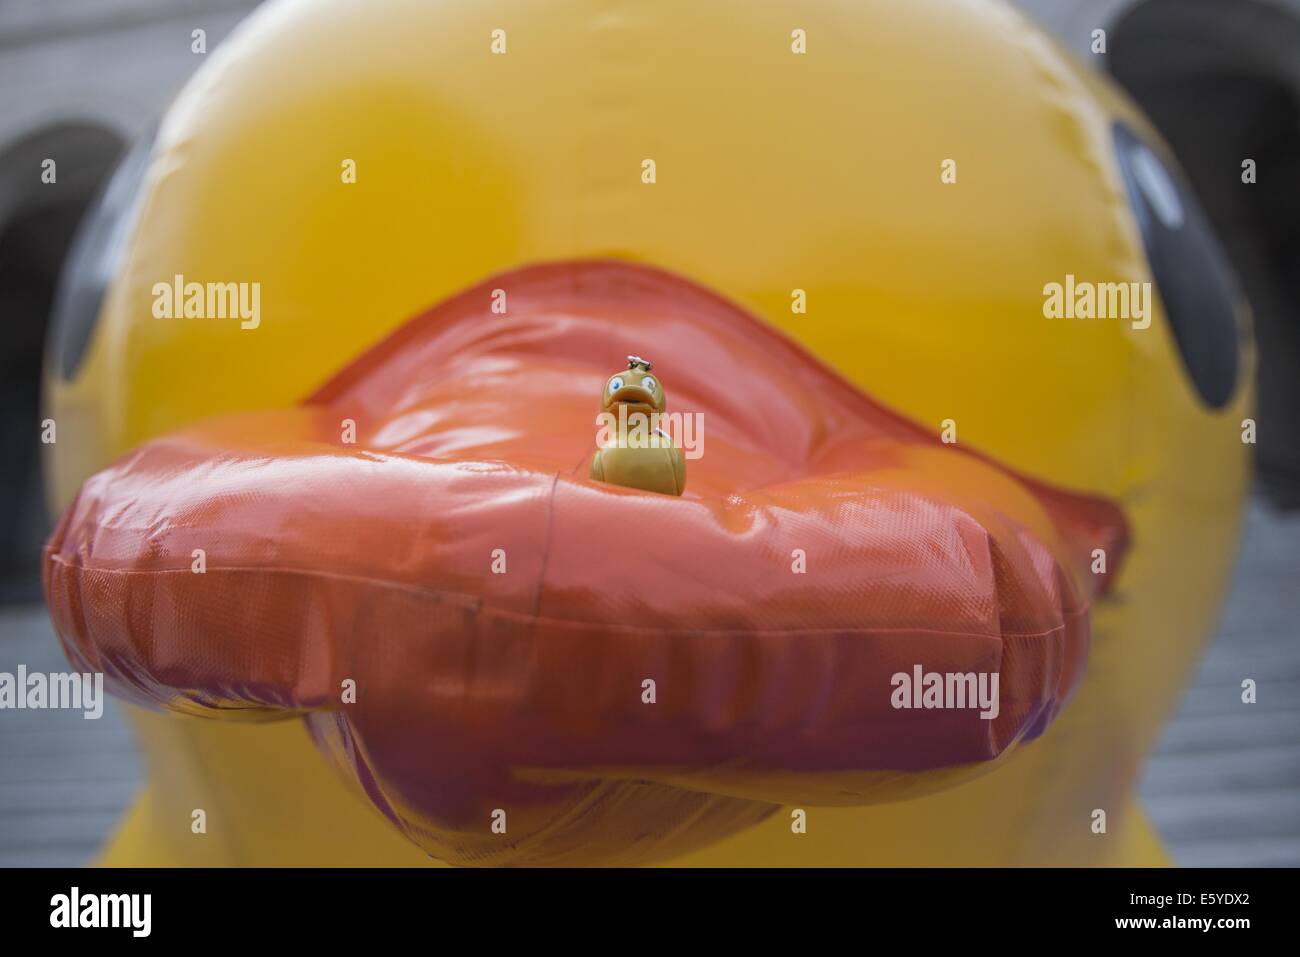 Los Angeles, California, USA. 8th Aug, 2014. A tiny rubber duck is sitting on the mouth of a 10-foot-tall rubber ducky ''baby duck'', on the Spring Street steps of Los Angeles City Hall on Friday, Aug. 8, 2014, in Los Angeles. The bright yellow, inflatable ducky is wandering the city in search of its mother, a 60 feet high and dubbed by event organizers as the world's largest rubber ducky as part of a promotional stunt for the Tall Ships Festival taking place Aug. 20-24 at the Port of Los Angeles. Credit:  Ringo Chiu/ZUMA Wire/Alamy Live News Stock Photo